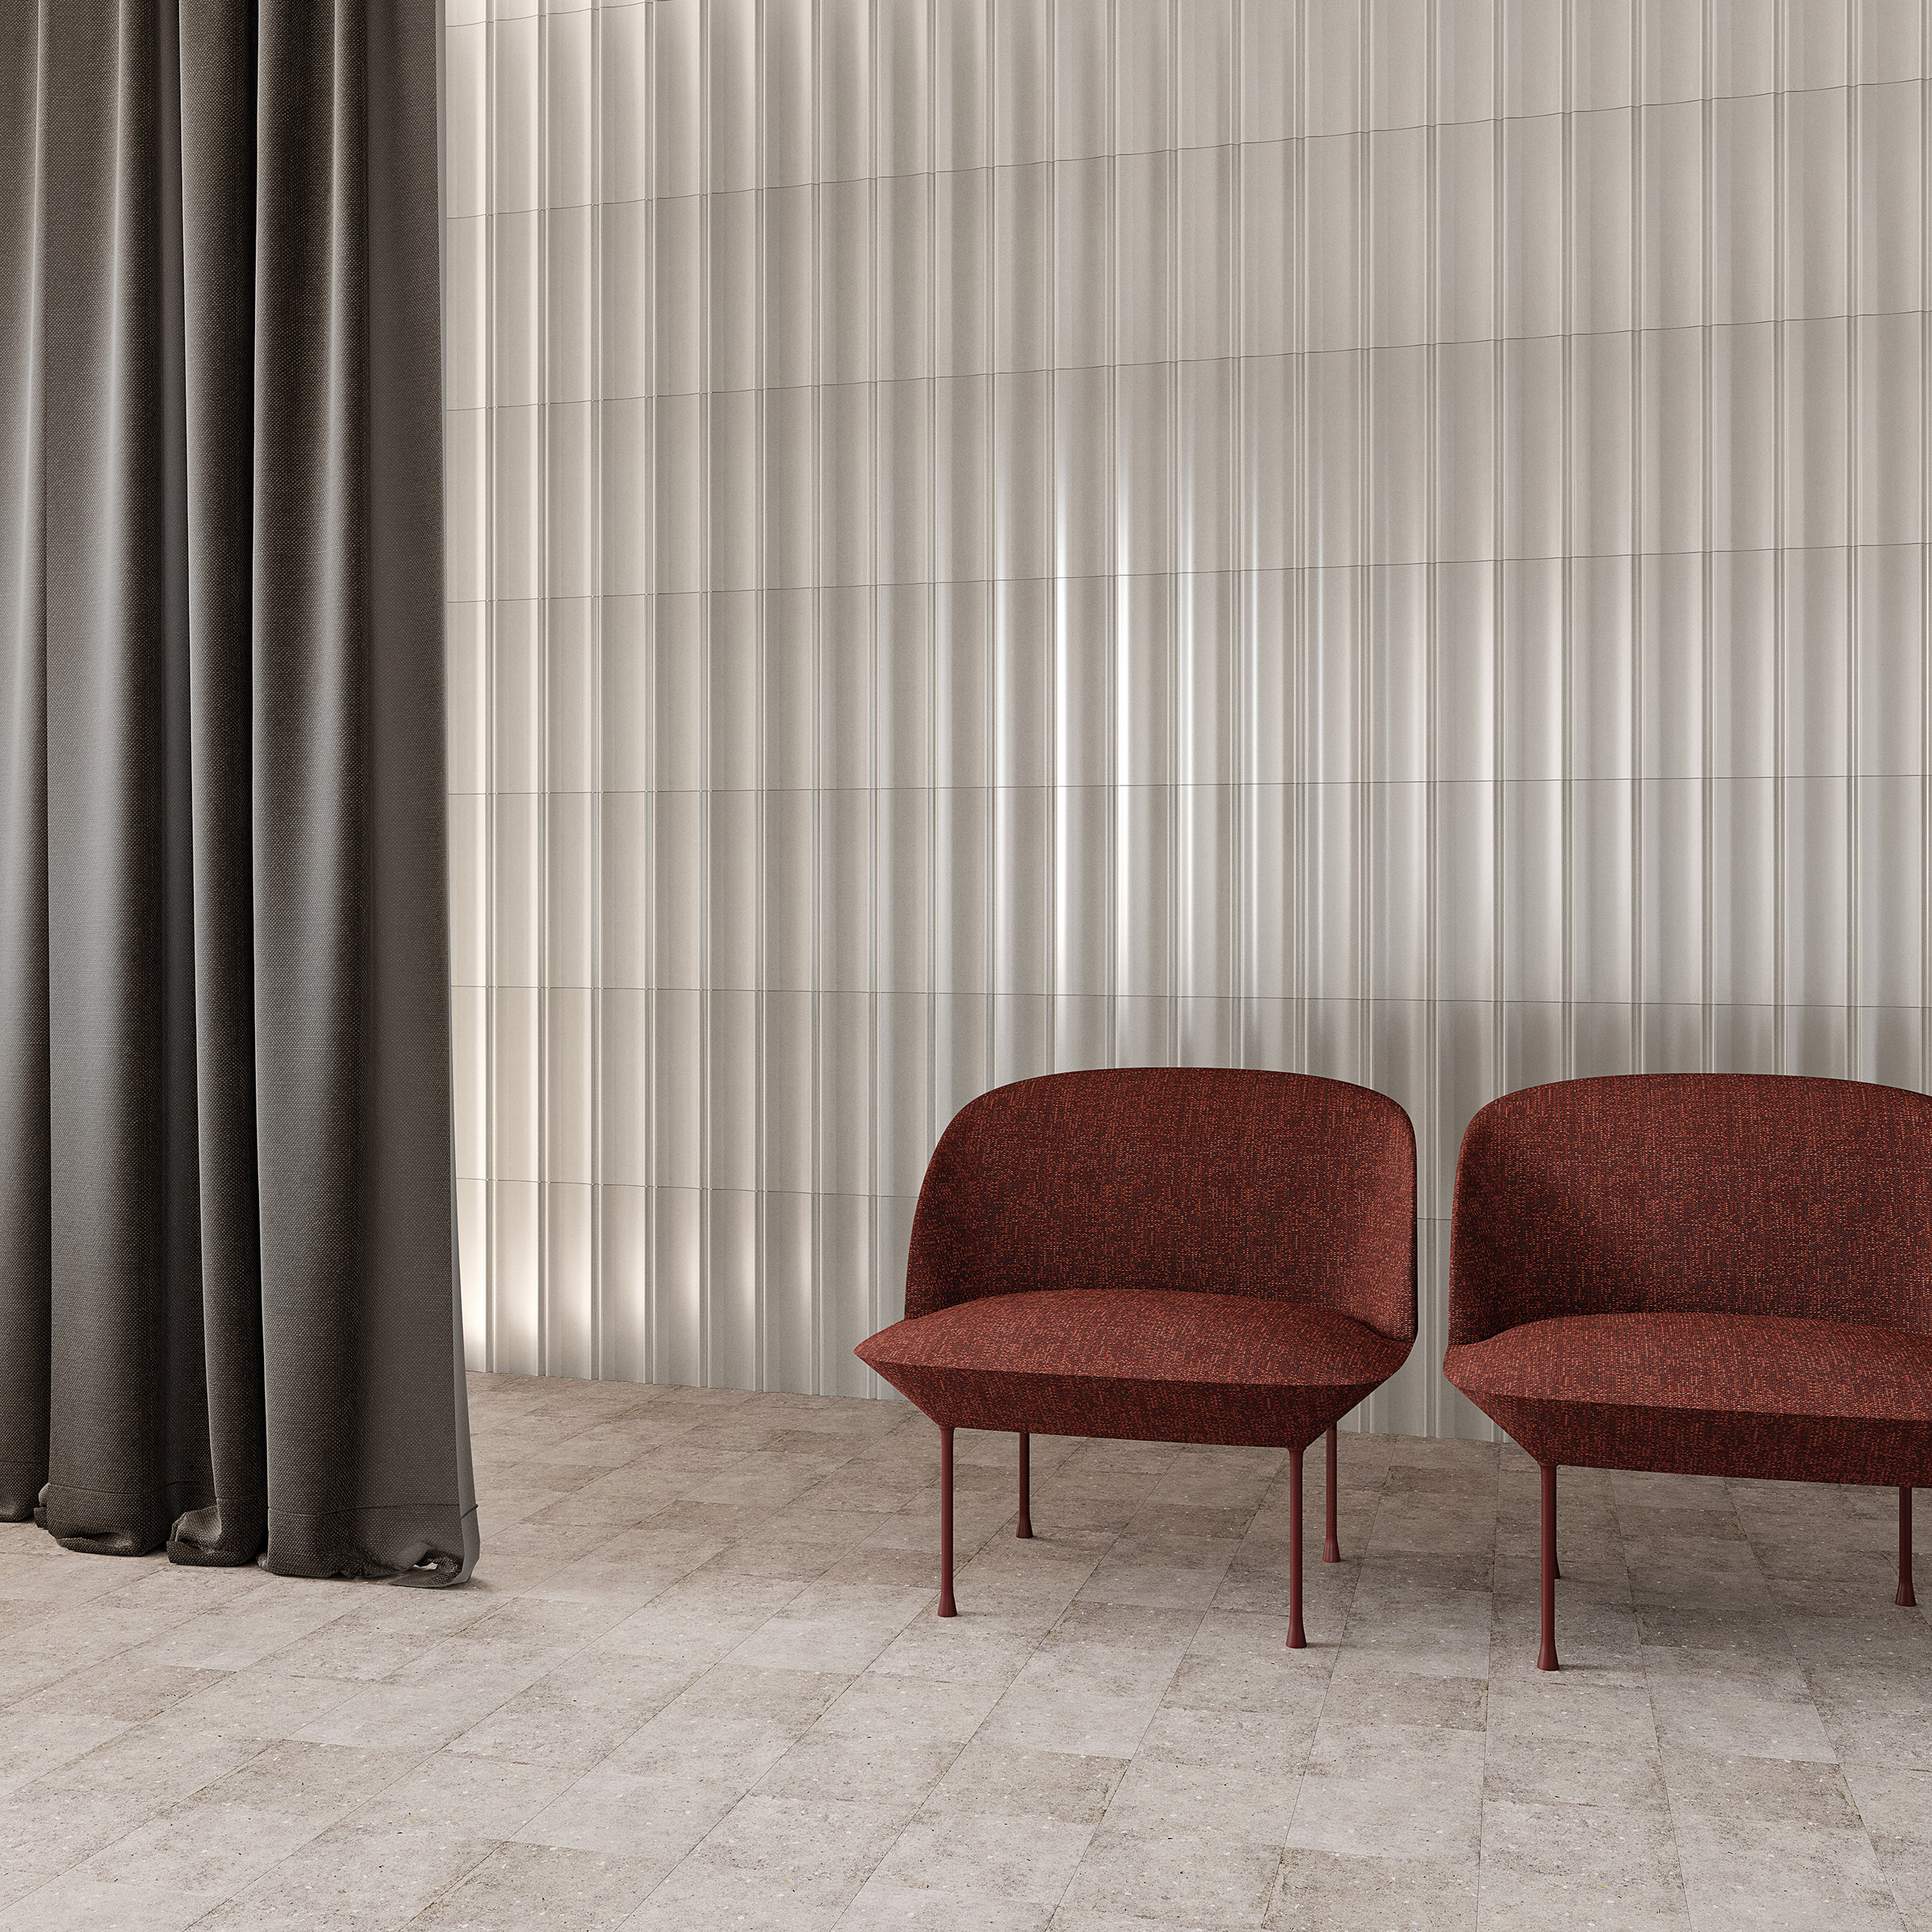 Bow tile collection by MUT Design for Harmony